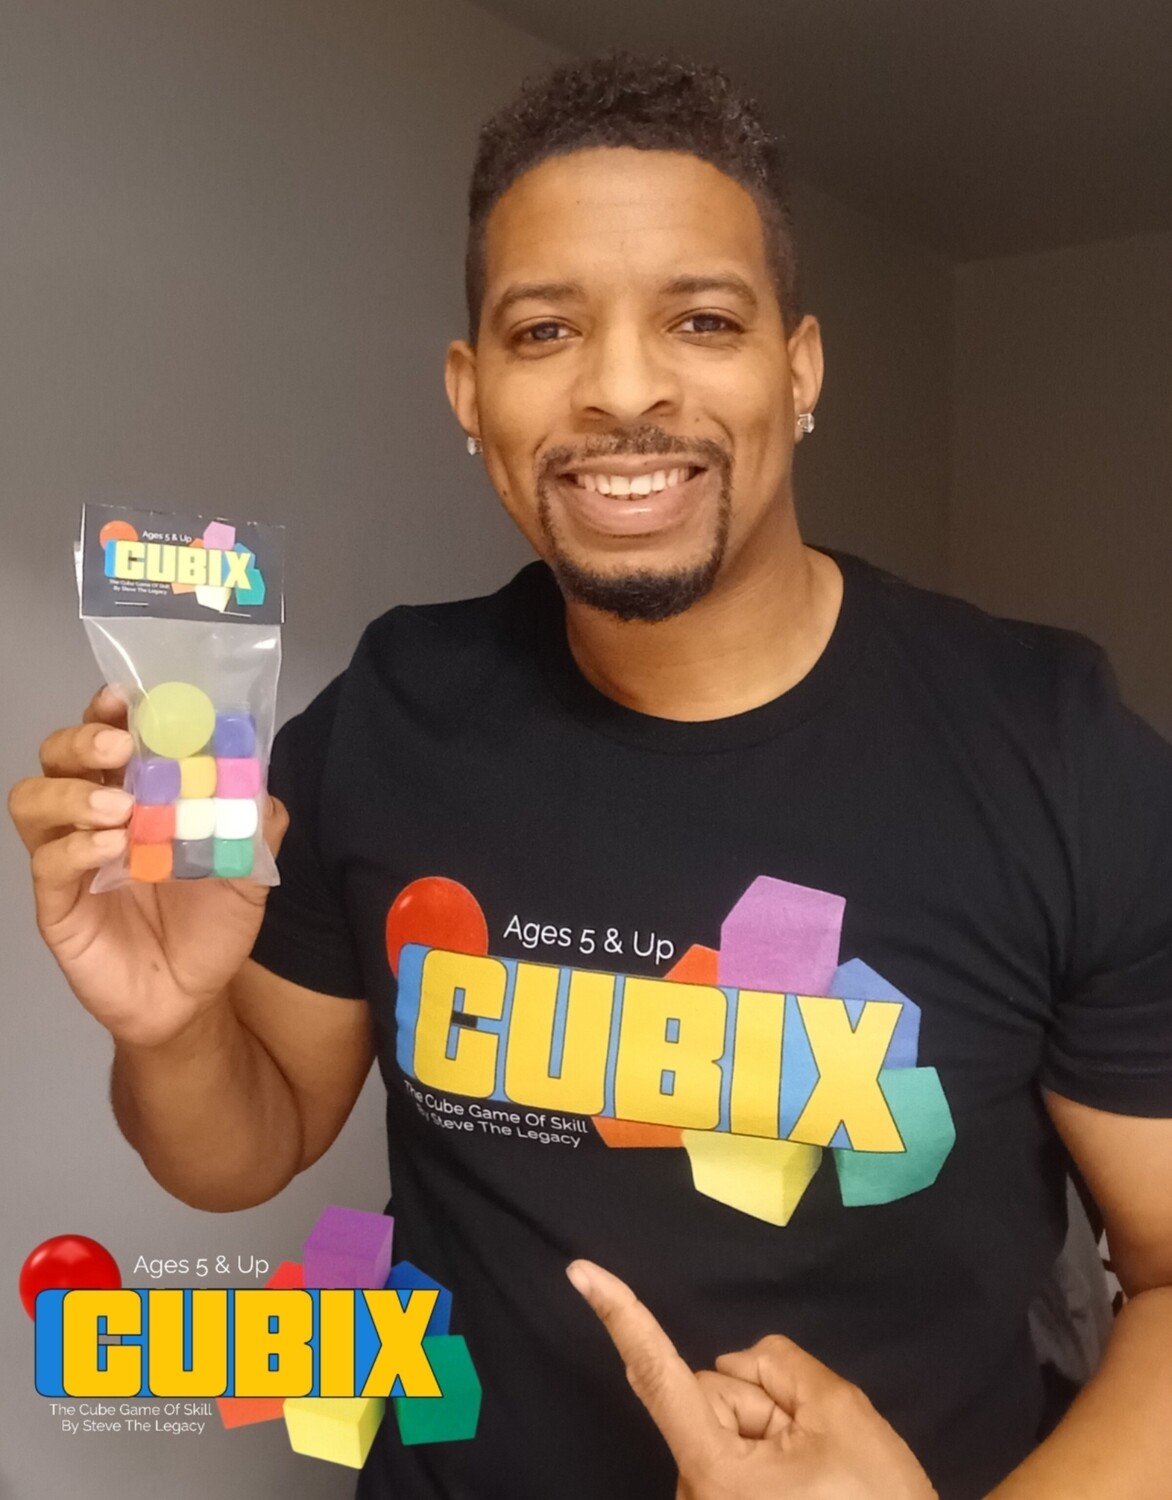 CUBIX THE GAME BY STEVE THE LEGACY 